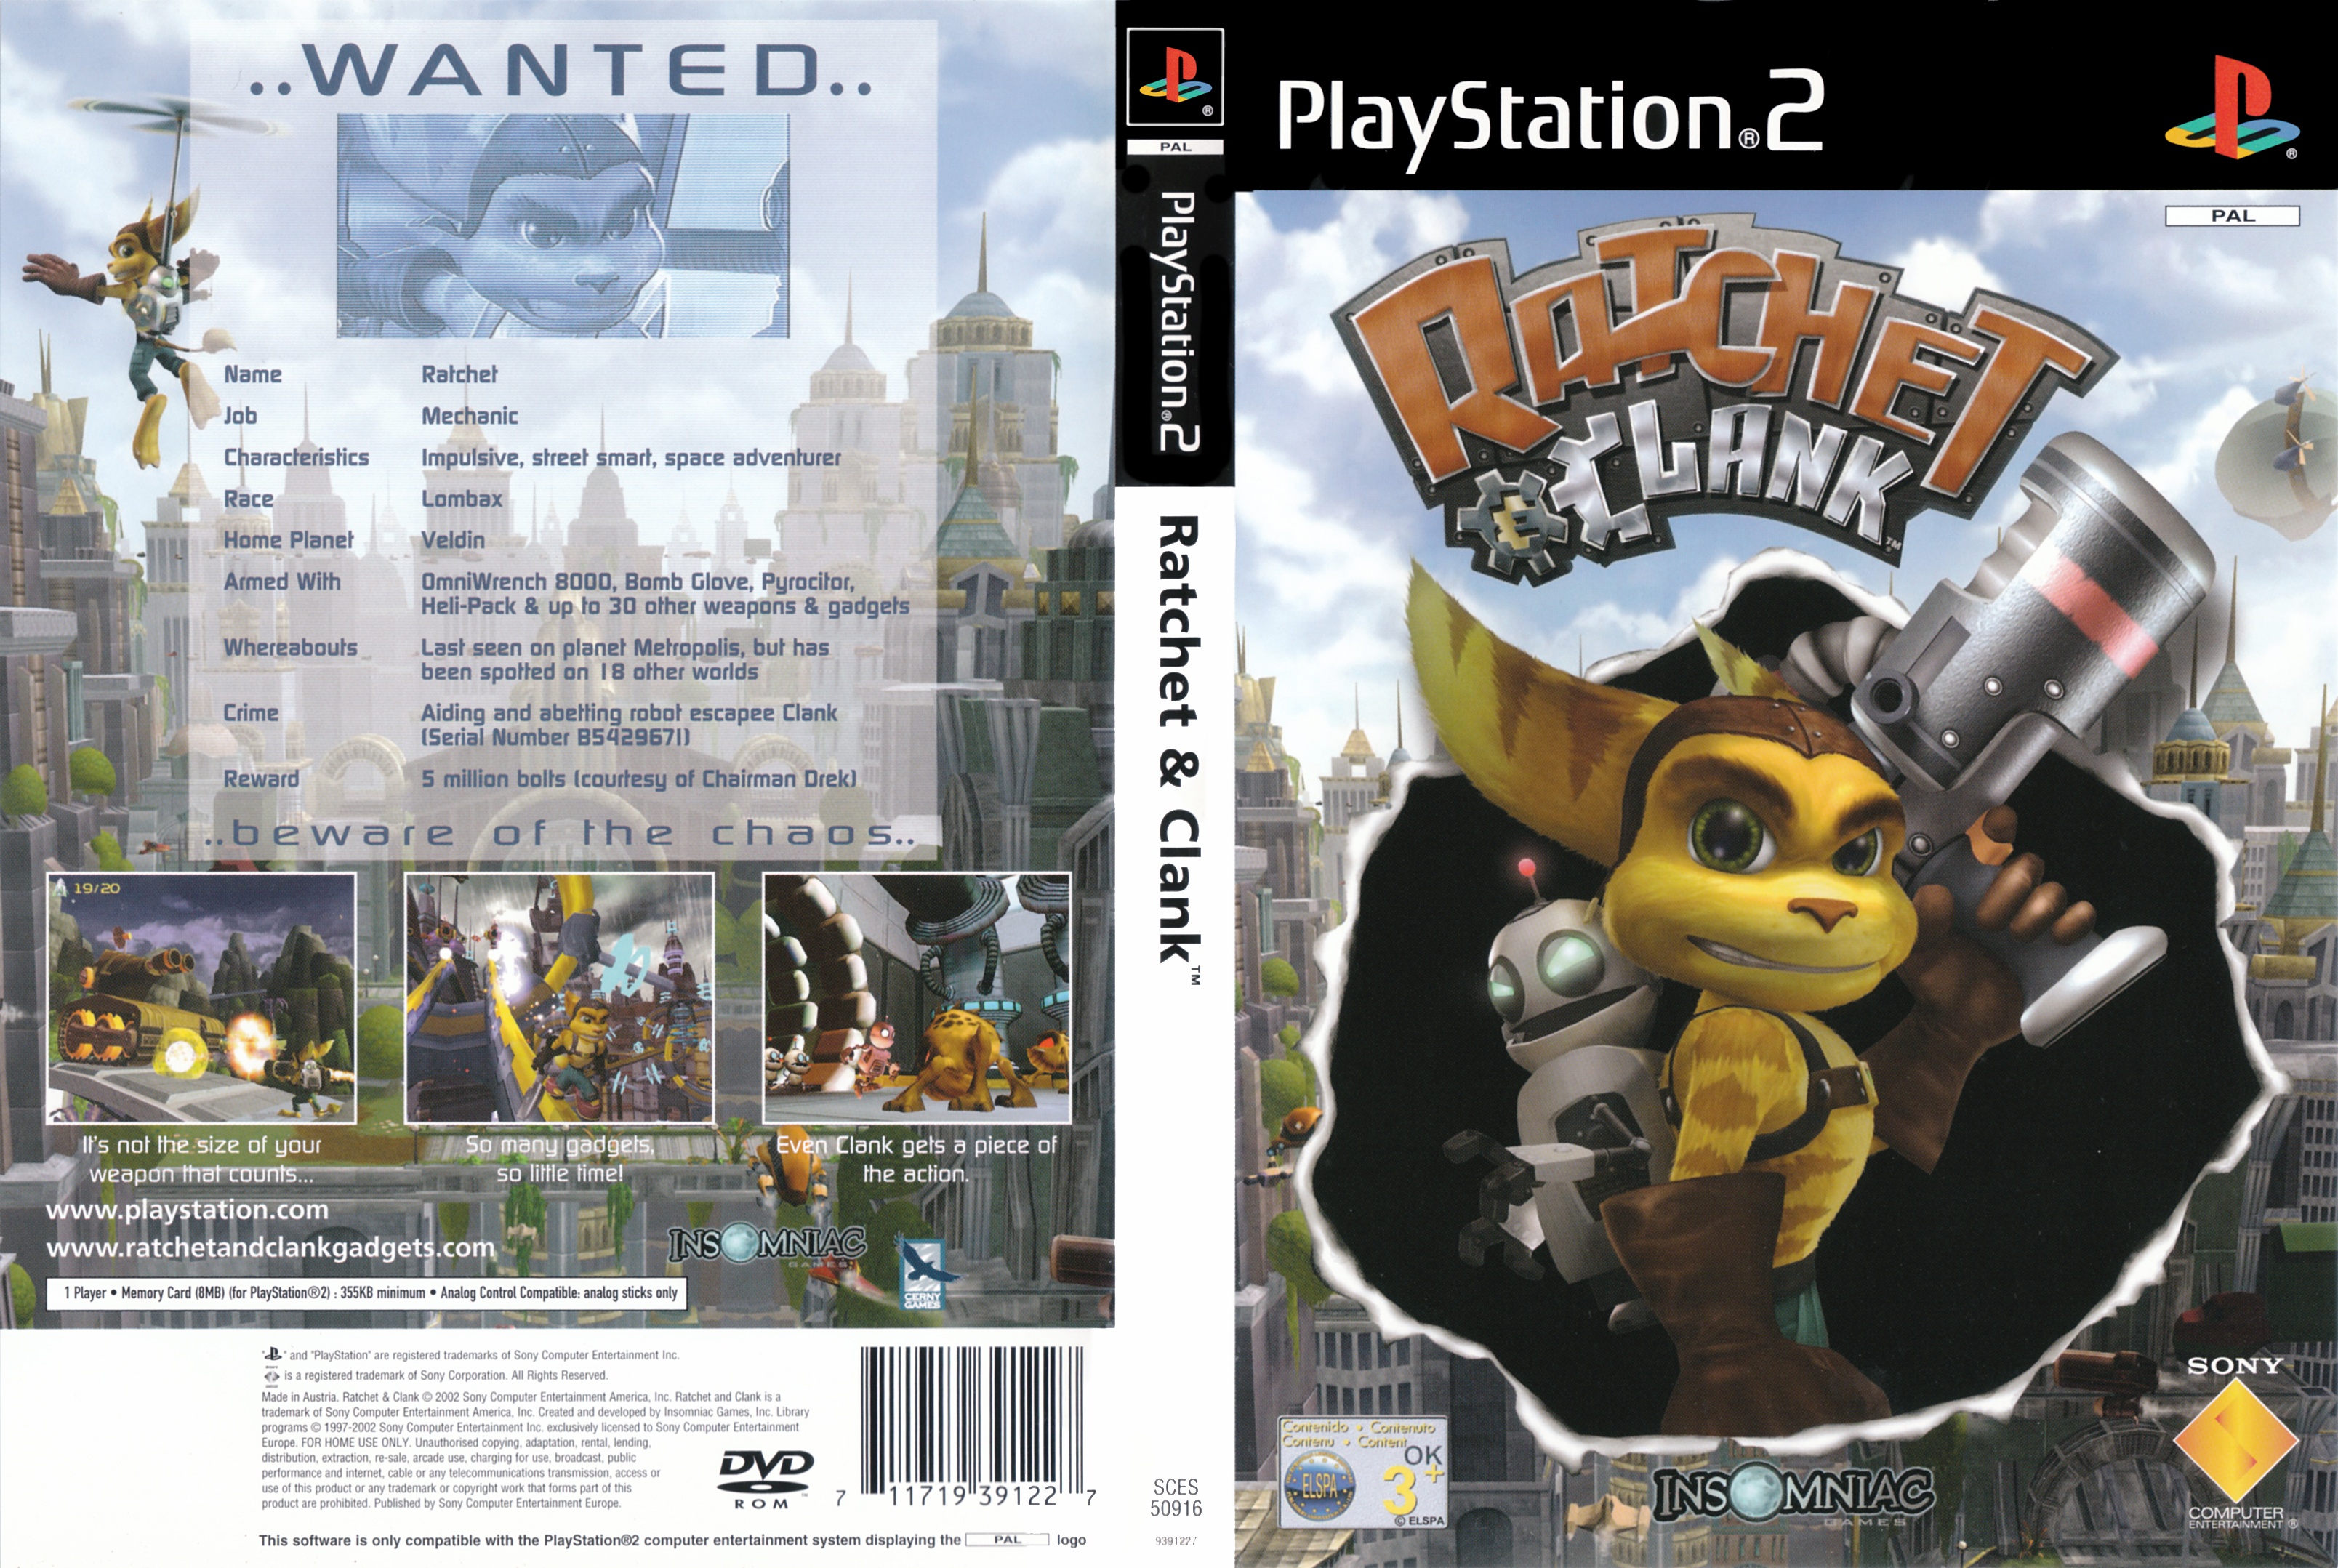 Video Game: Ratchet & Clank (PlayStation 2, EuropeCol:PS2-50916